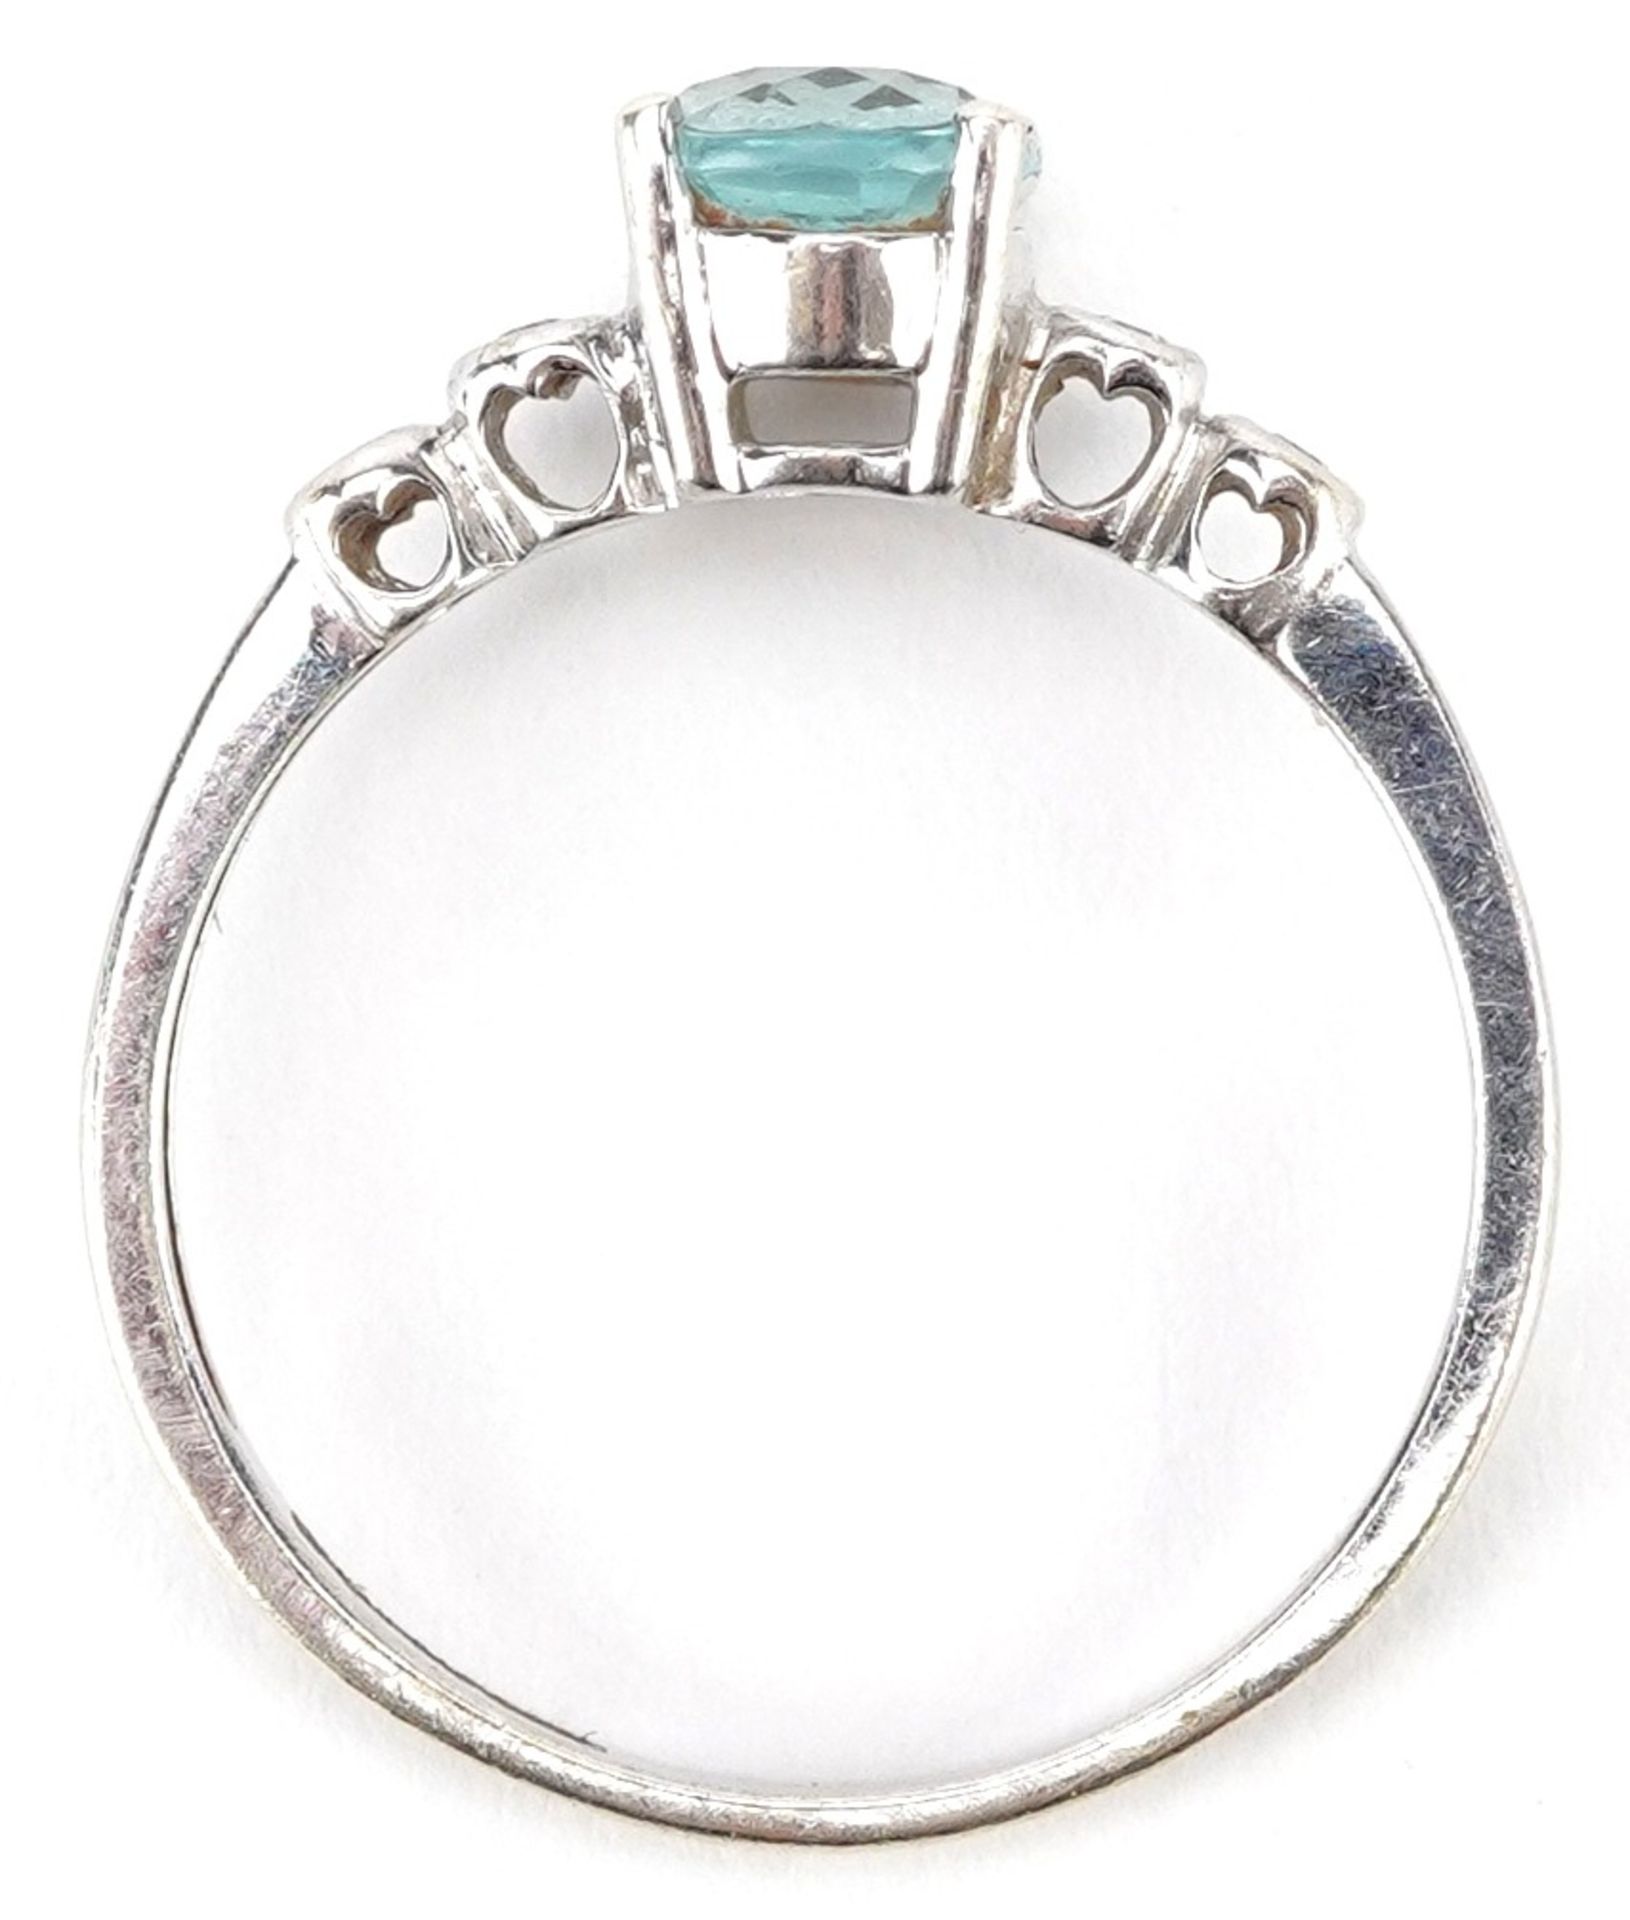 9ct white gold blue topaz ring with diamond set shoulders, the topaz approximately 8.0mm x 6.0mm x - Bild 3 aus 5